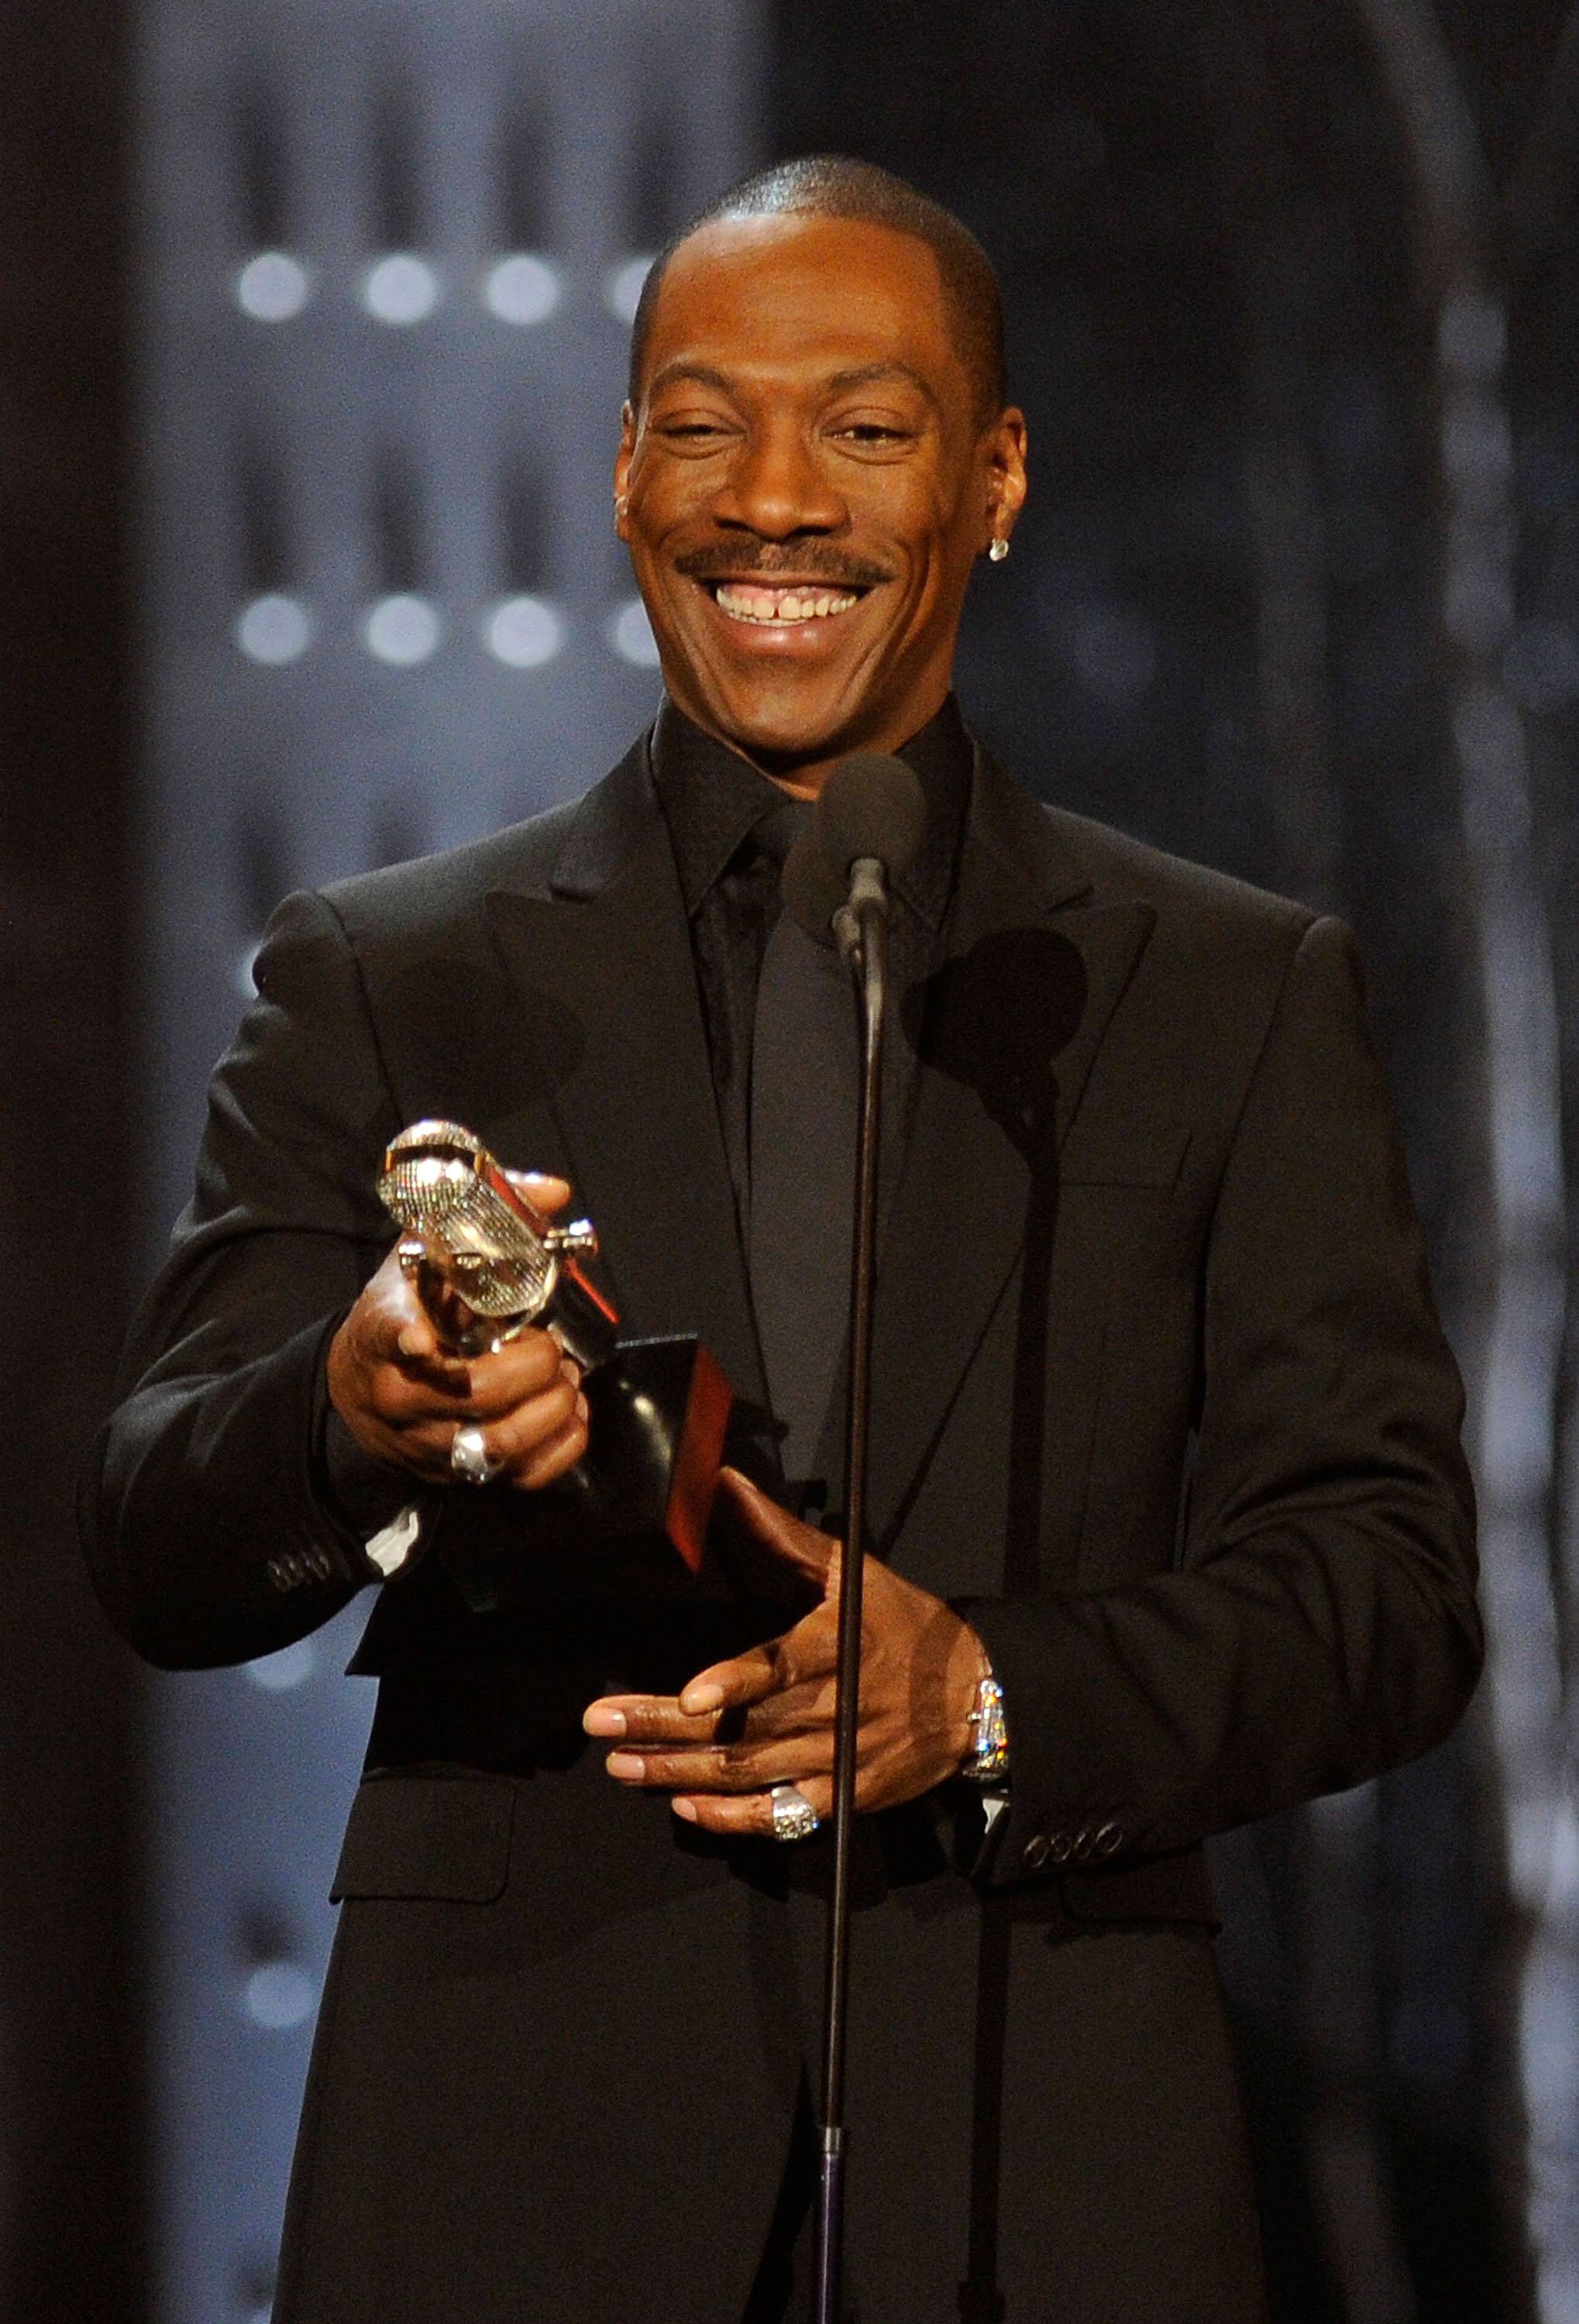 Eddie Murphy: April 3 - Academy Award–nominated actor and comedian Eddie Murphy turns 50.(Photo credit: Dimitrios Kambouris/Getty Images)